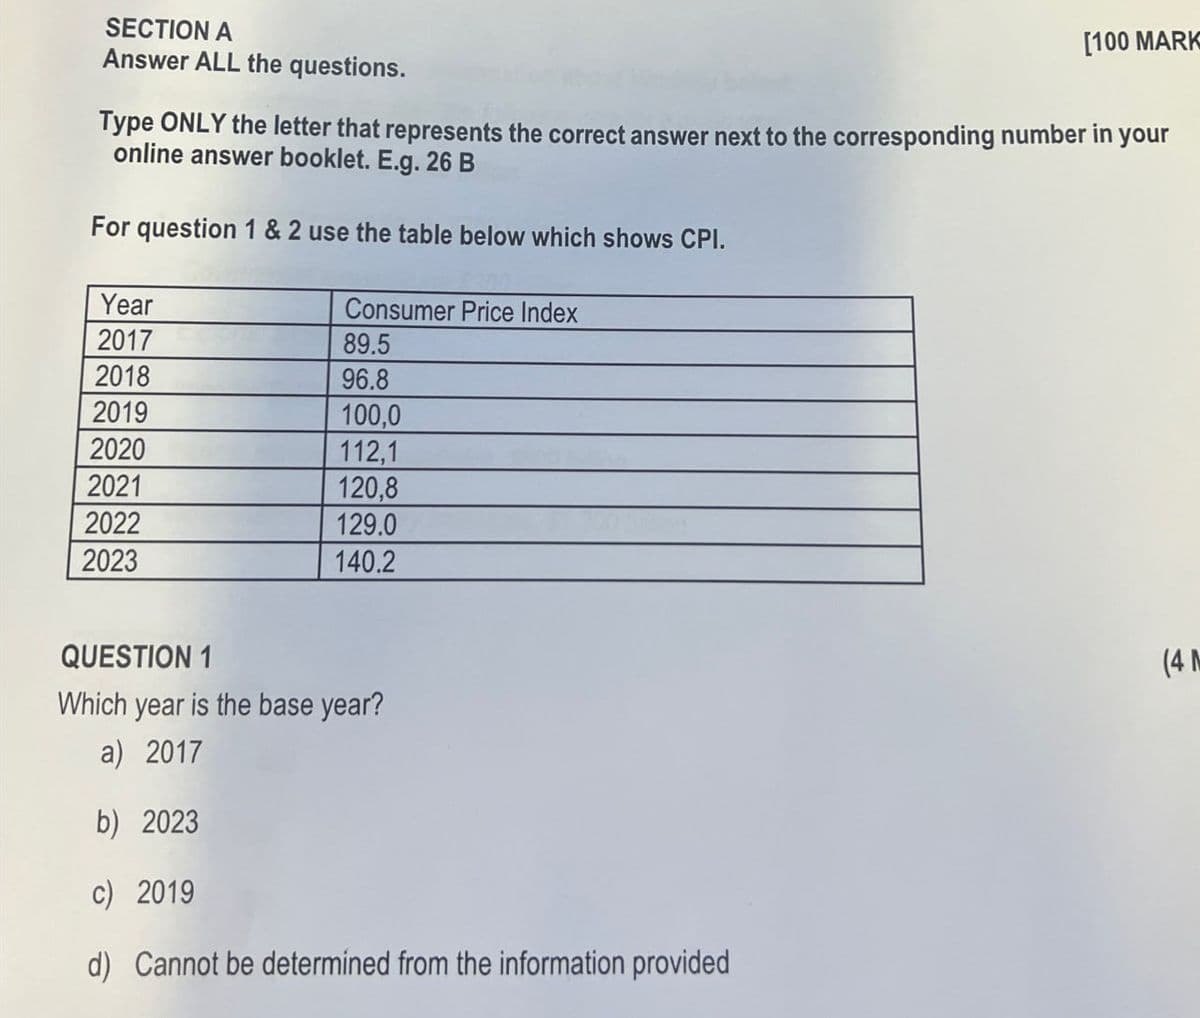 [100 MARK
SECTION A
Answer ALL the questions.
Type ONLY the letter that represents the correct answer next to the corresponding number in your
online answer booklet. E.g. 26 B
For question 1 & 2 use the table below which shows CPI.
Year
Consumer Price Index
2017
89.5
2018
96.8
2019
100,0
2020
112,1
2021
120,8
2022
129.0
2023
140.2
QUESTION 1
Which year is the base year?
a) 2017
b) 2023
c) 2019
d) Cannot be determined from the information provided
(4 M